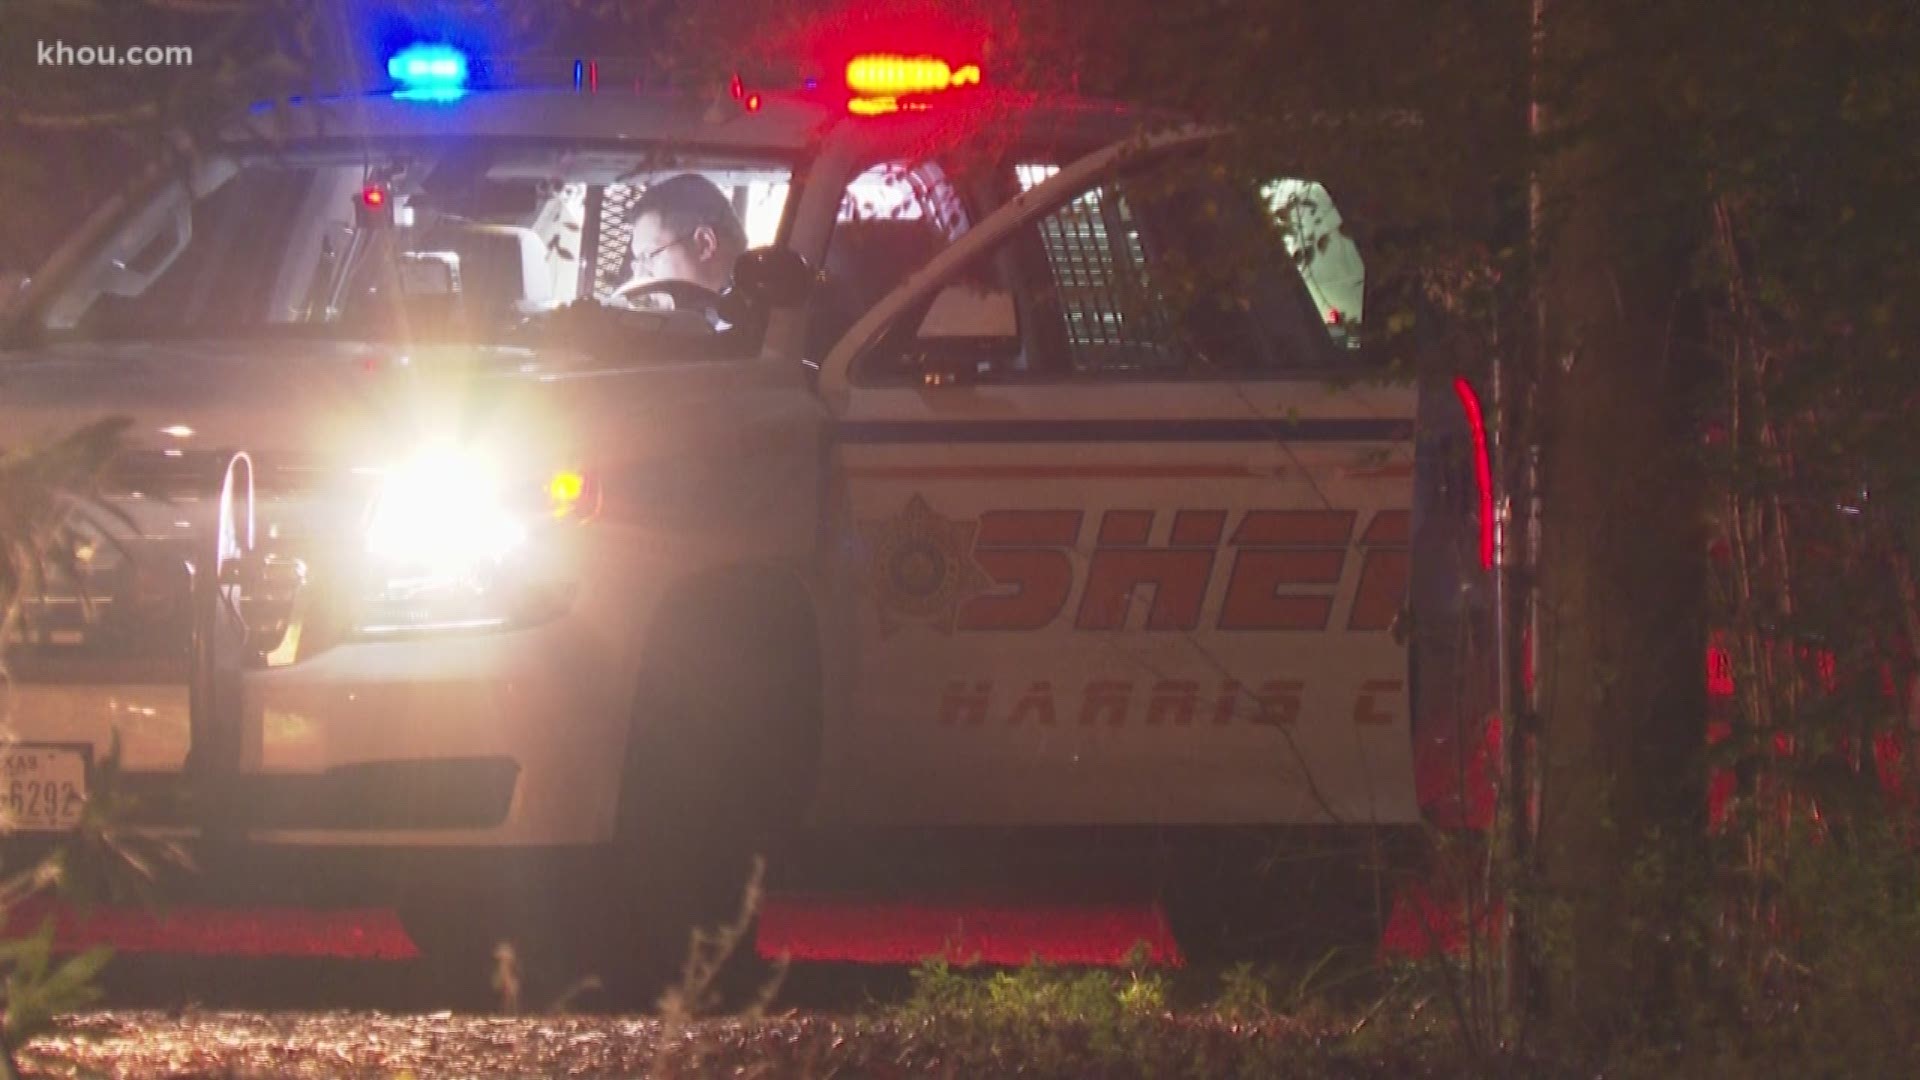 A 10-year-old was accidentally shot Tuesday night by his 12-year-old friend, according to Harris County Sheriff’s deputies.